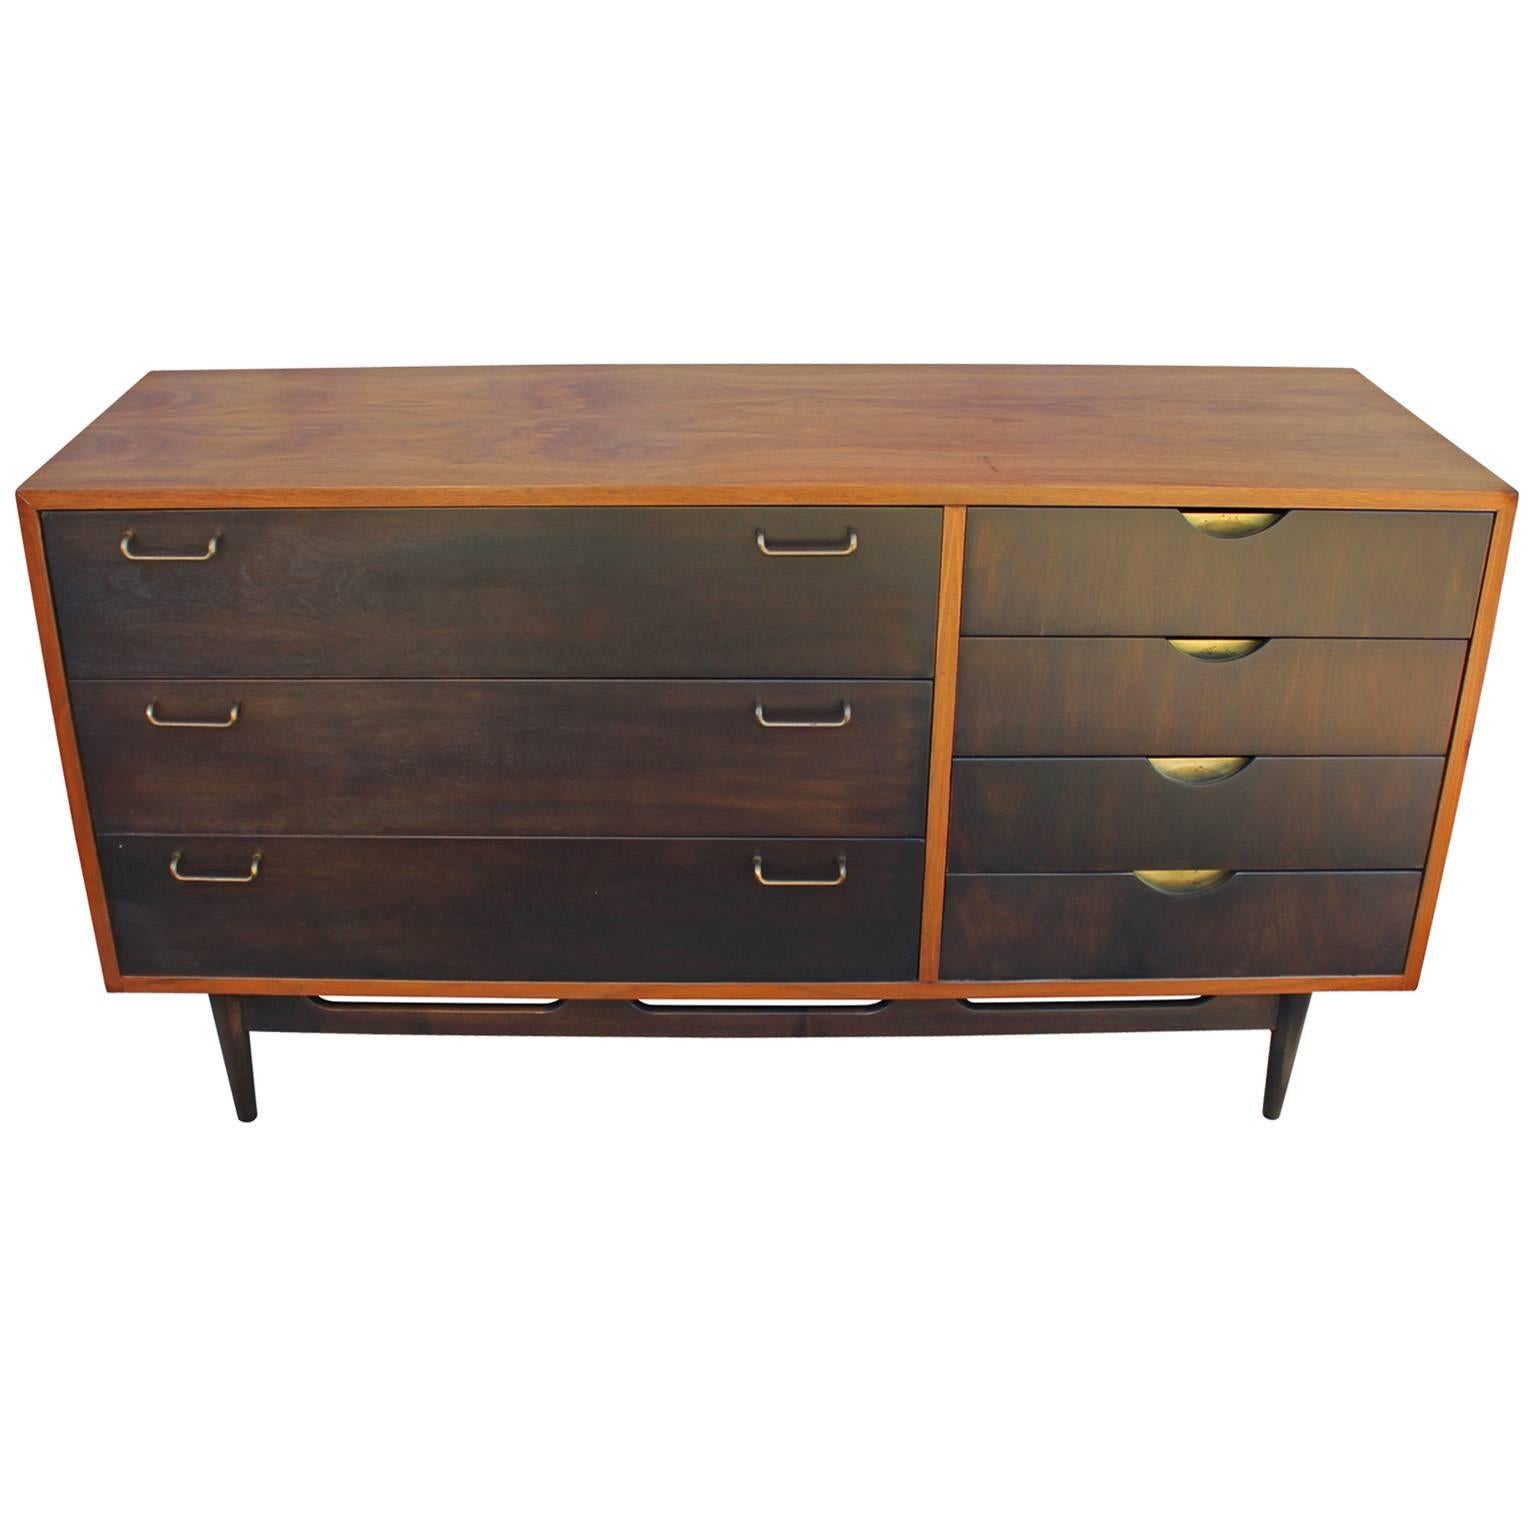 Lovely seven-drawer dresser with aged brass accents. Dresser is freshly finished in a two tone walnut, with the case a medium walnut and the drawer fronts a darker shade. Top two drawers are sectioned for easy organization.